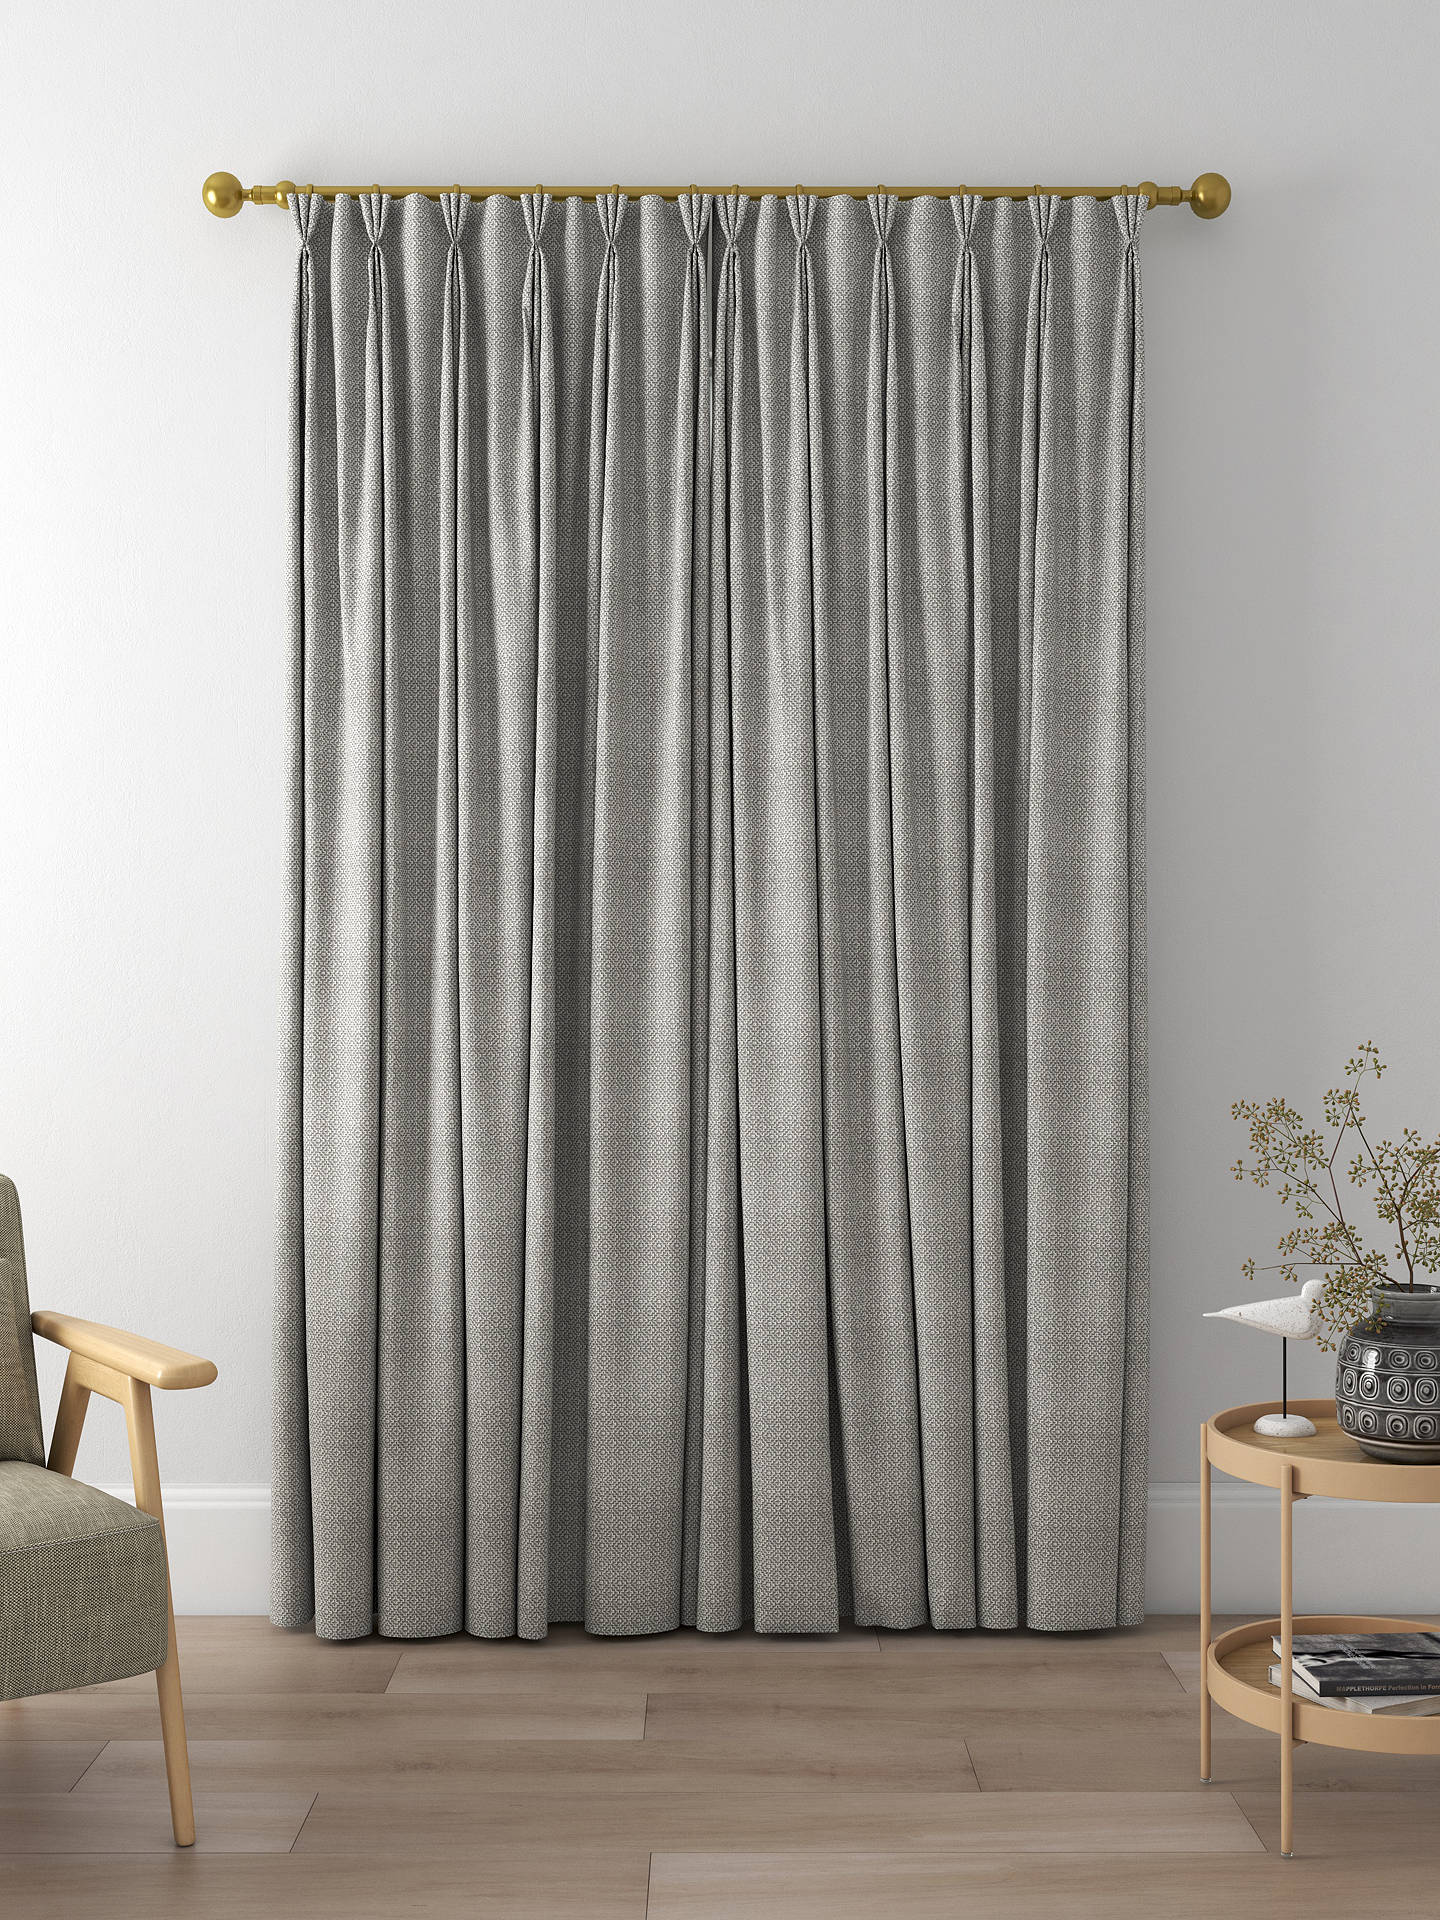 Sanderson Linden Made to Measure Curtains, Dove